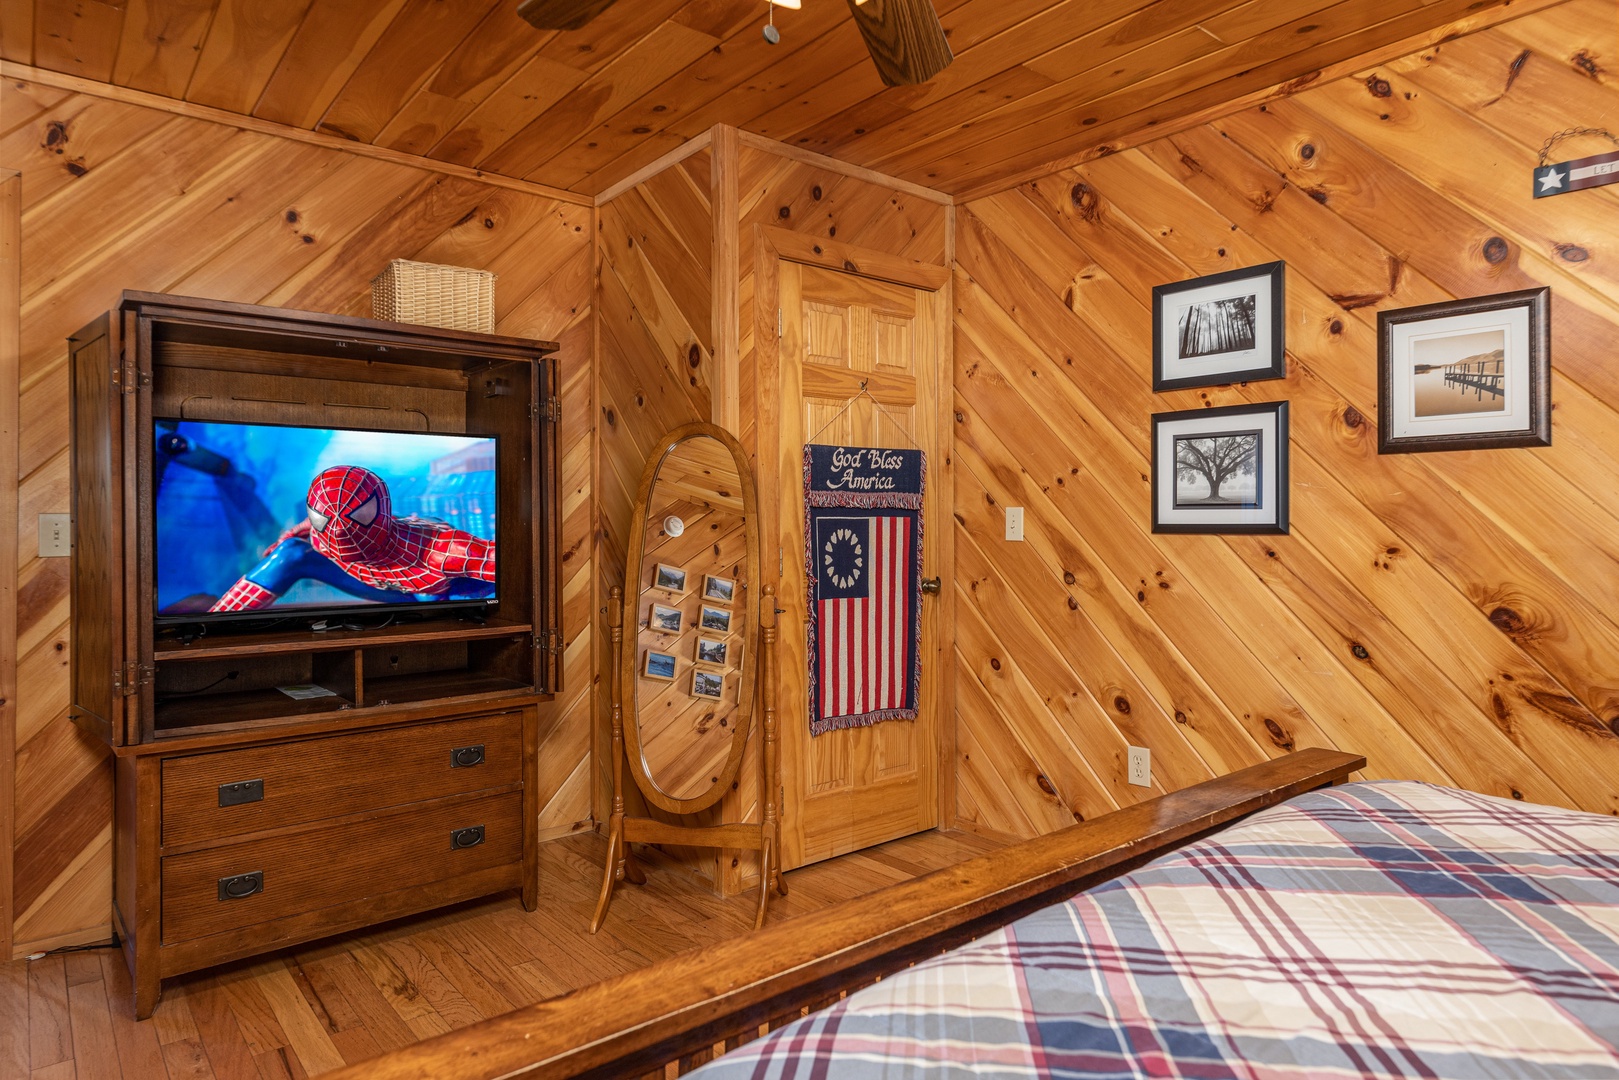 TV and armoir in a bedroom at Hatcher Mountain Retreat a 2 bedroom cabin rental located in Pigeon Forge